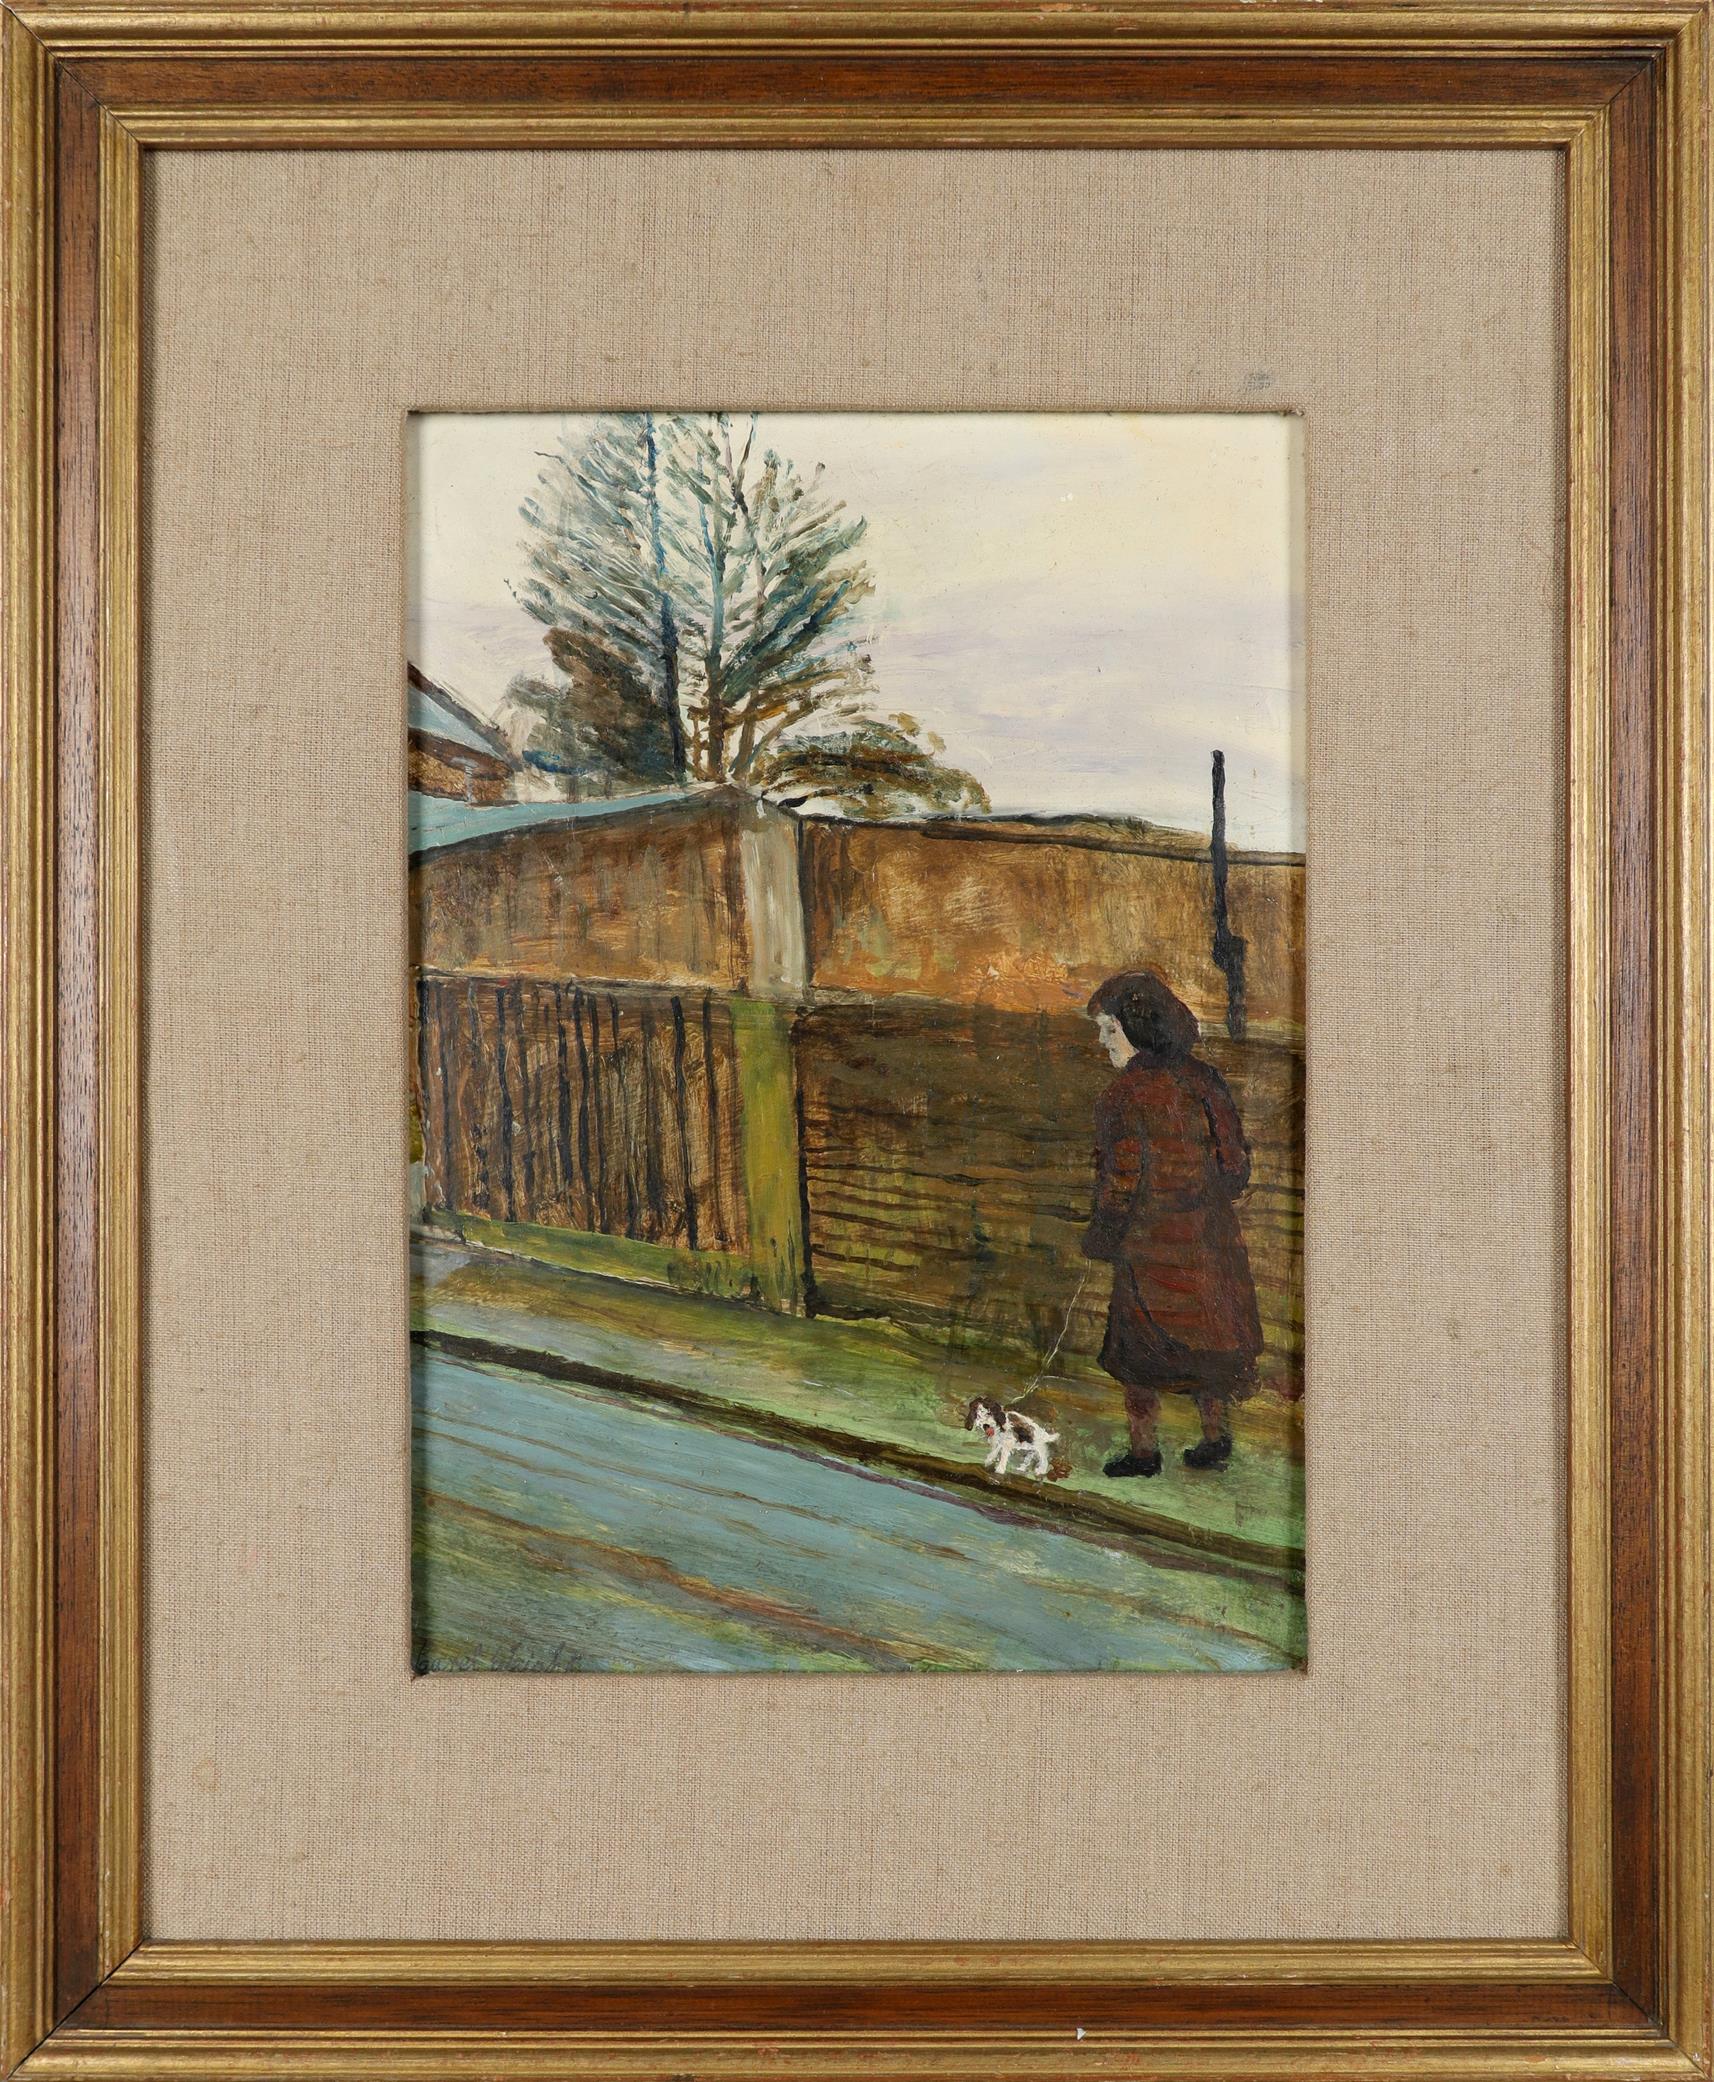 ‡Carel Weight CH, CBE, RA (1908-1997) Warm & Dry Signed Carel Weight (lower left) Oil on board 30. - Image 2 of 3